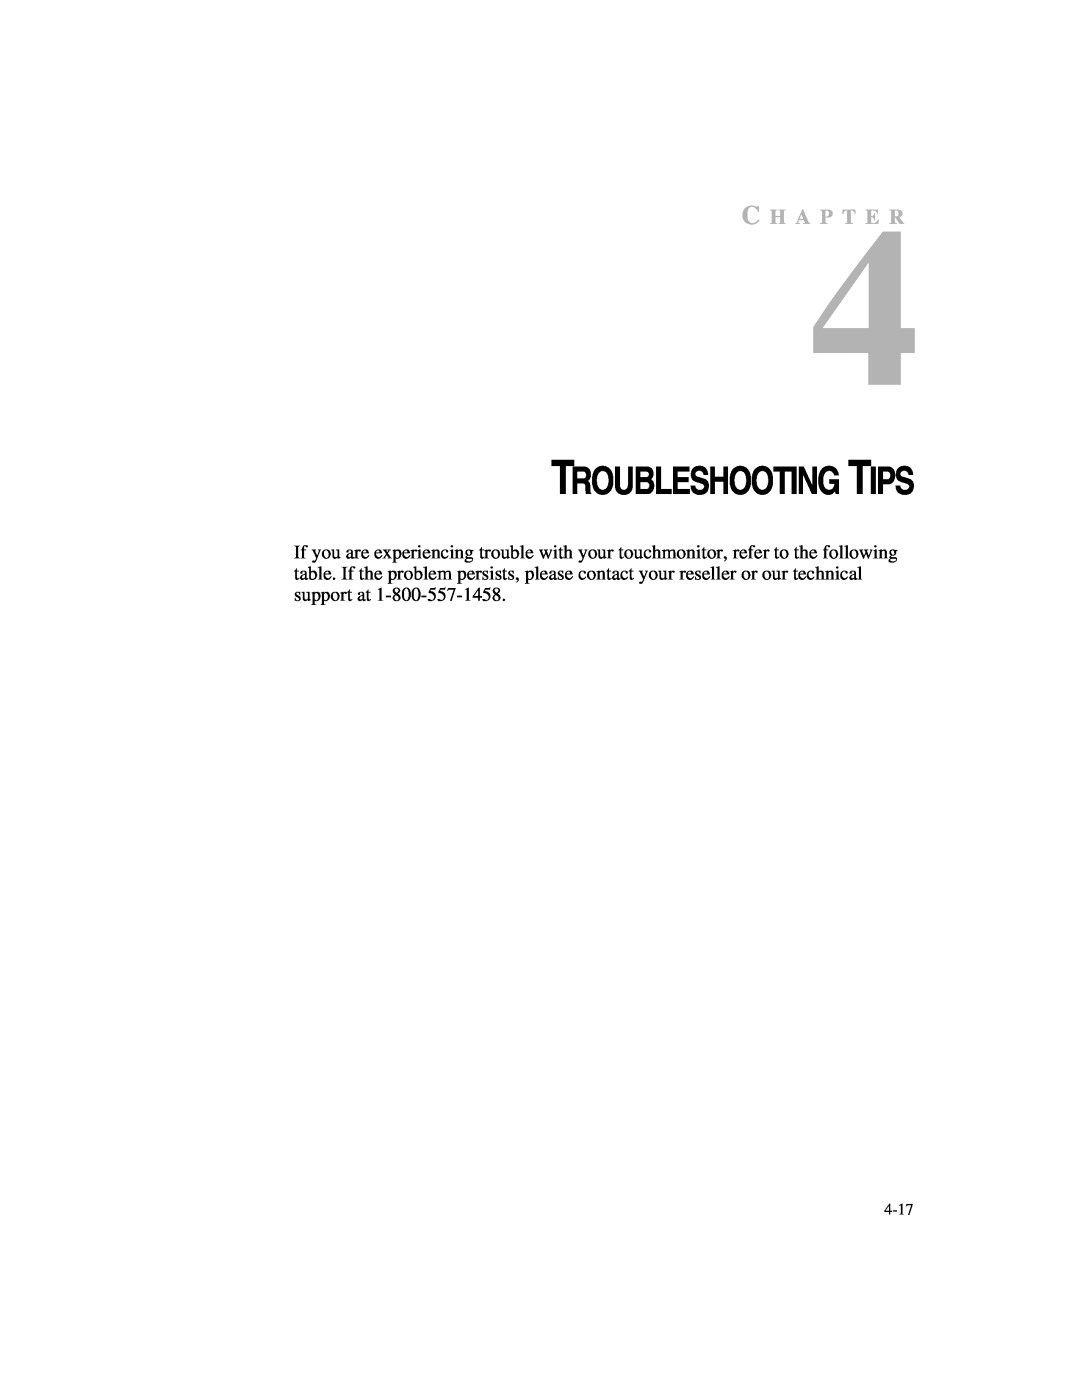 Elo TouchSystems 1725L Series manual Troubleshooting Tips, C H A P T E R 